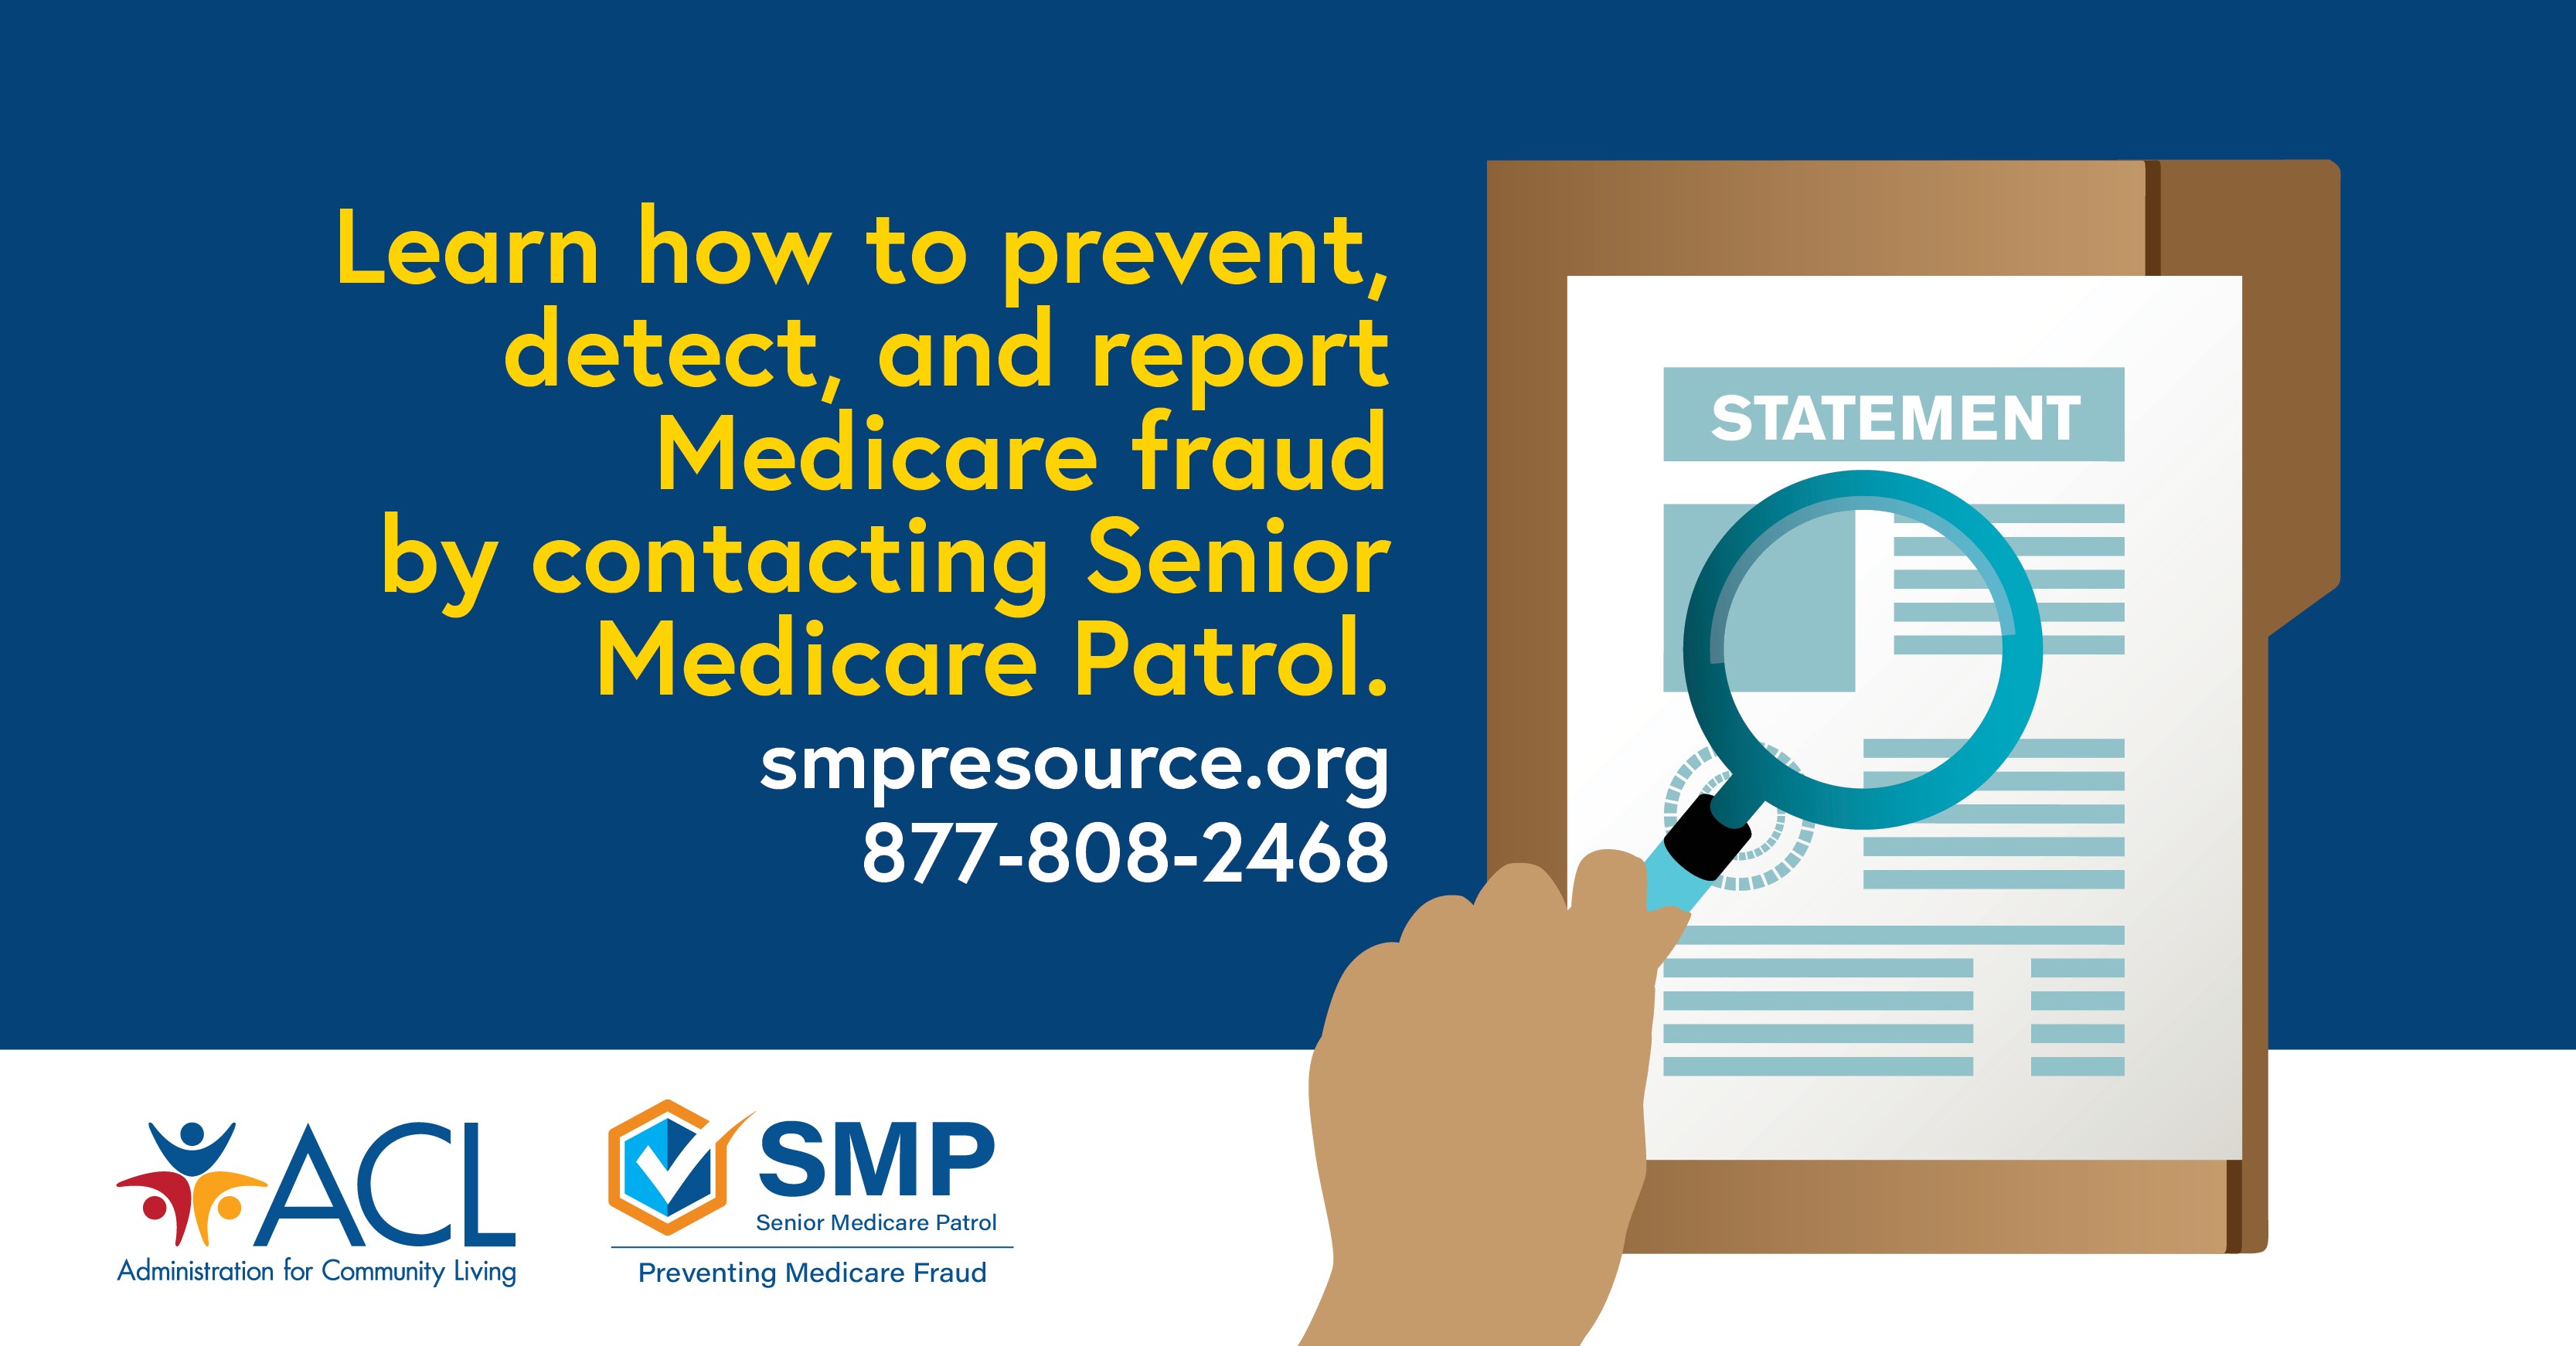 Learn how to prevent, detect, and report Medicare fraud by contacting Senior Medicare Patrol. smpresource.org. 877-808-2468. ACL logo, SMP logo